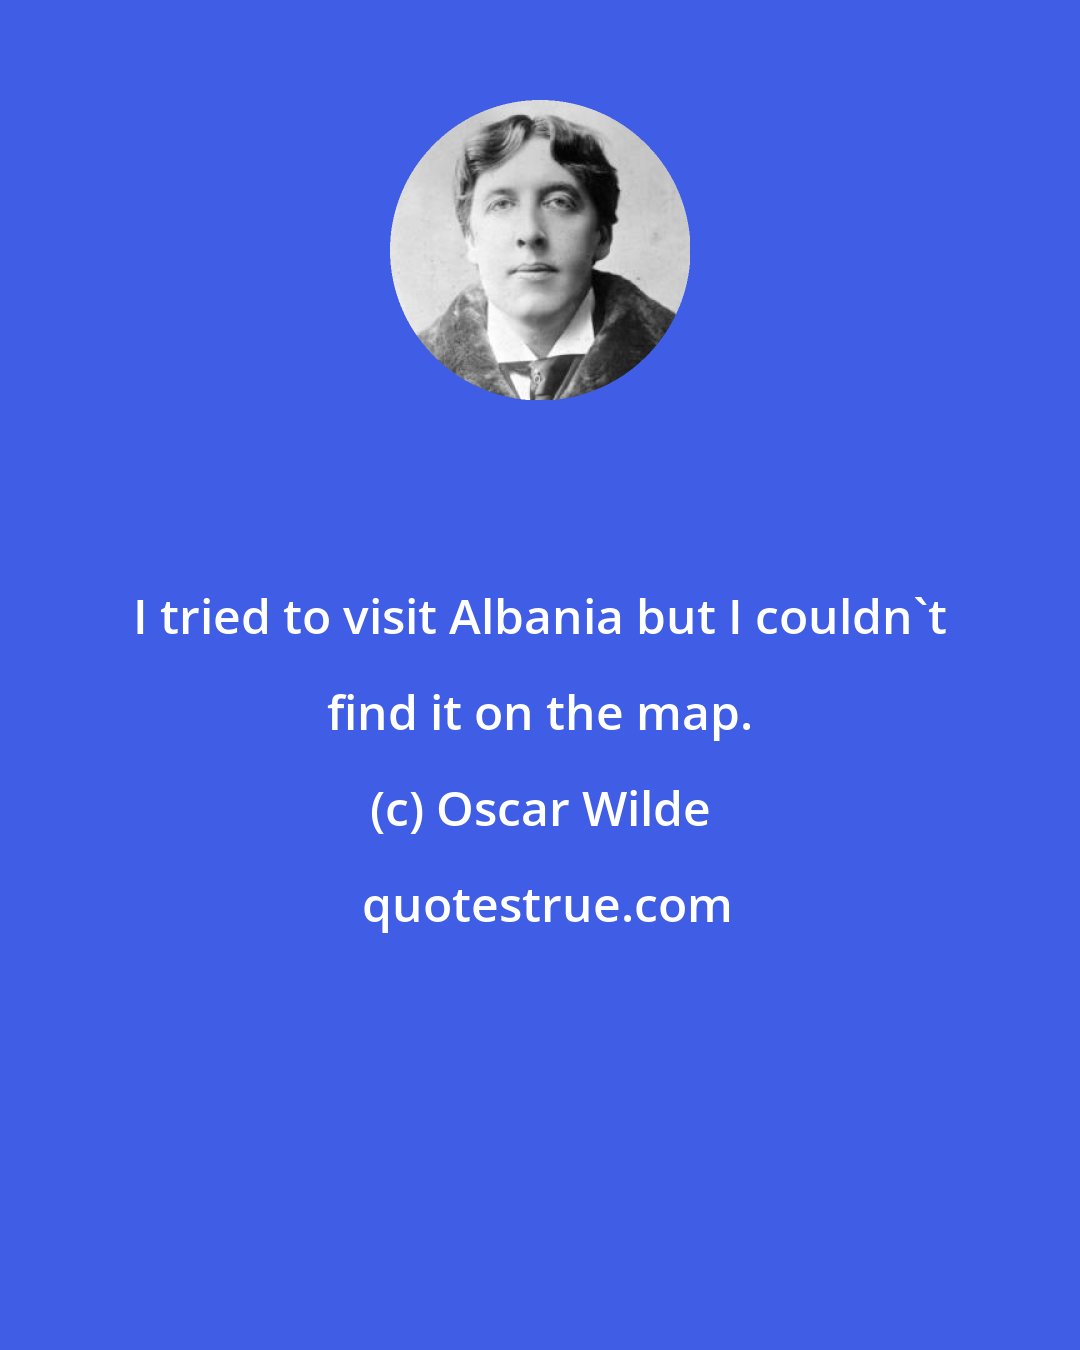 Oscar Wilde: I tried to visit Albania but I couldn't find it on the map.